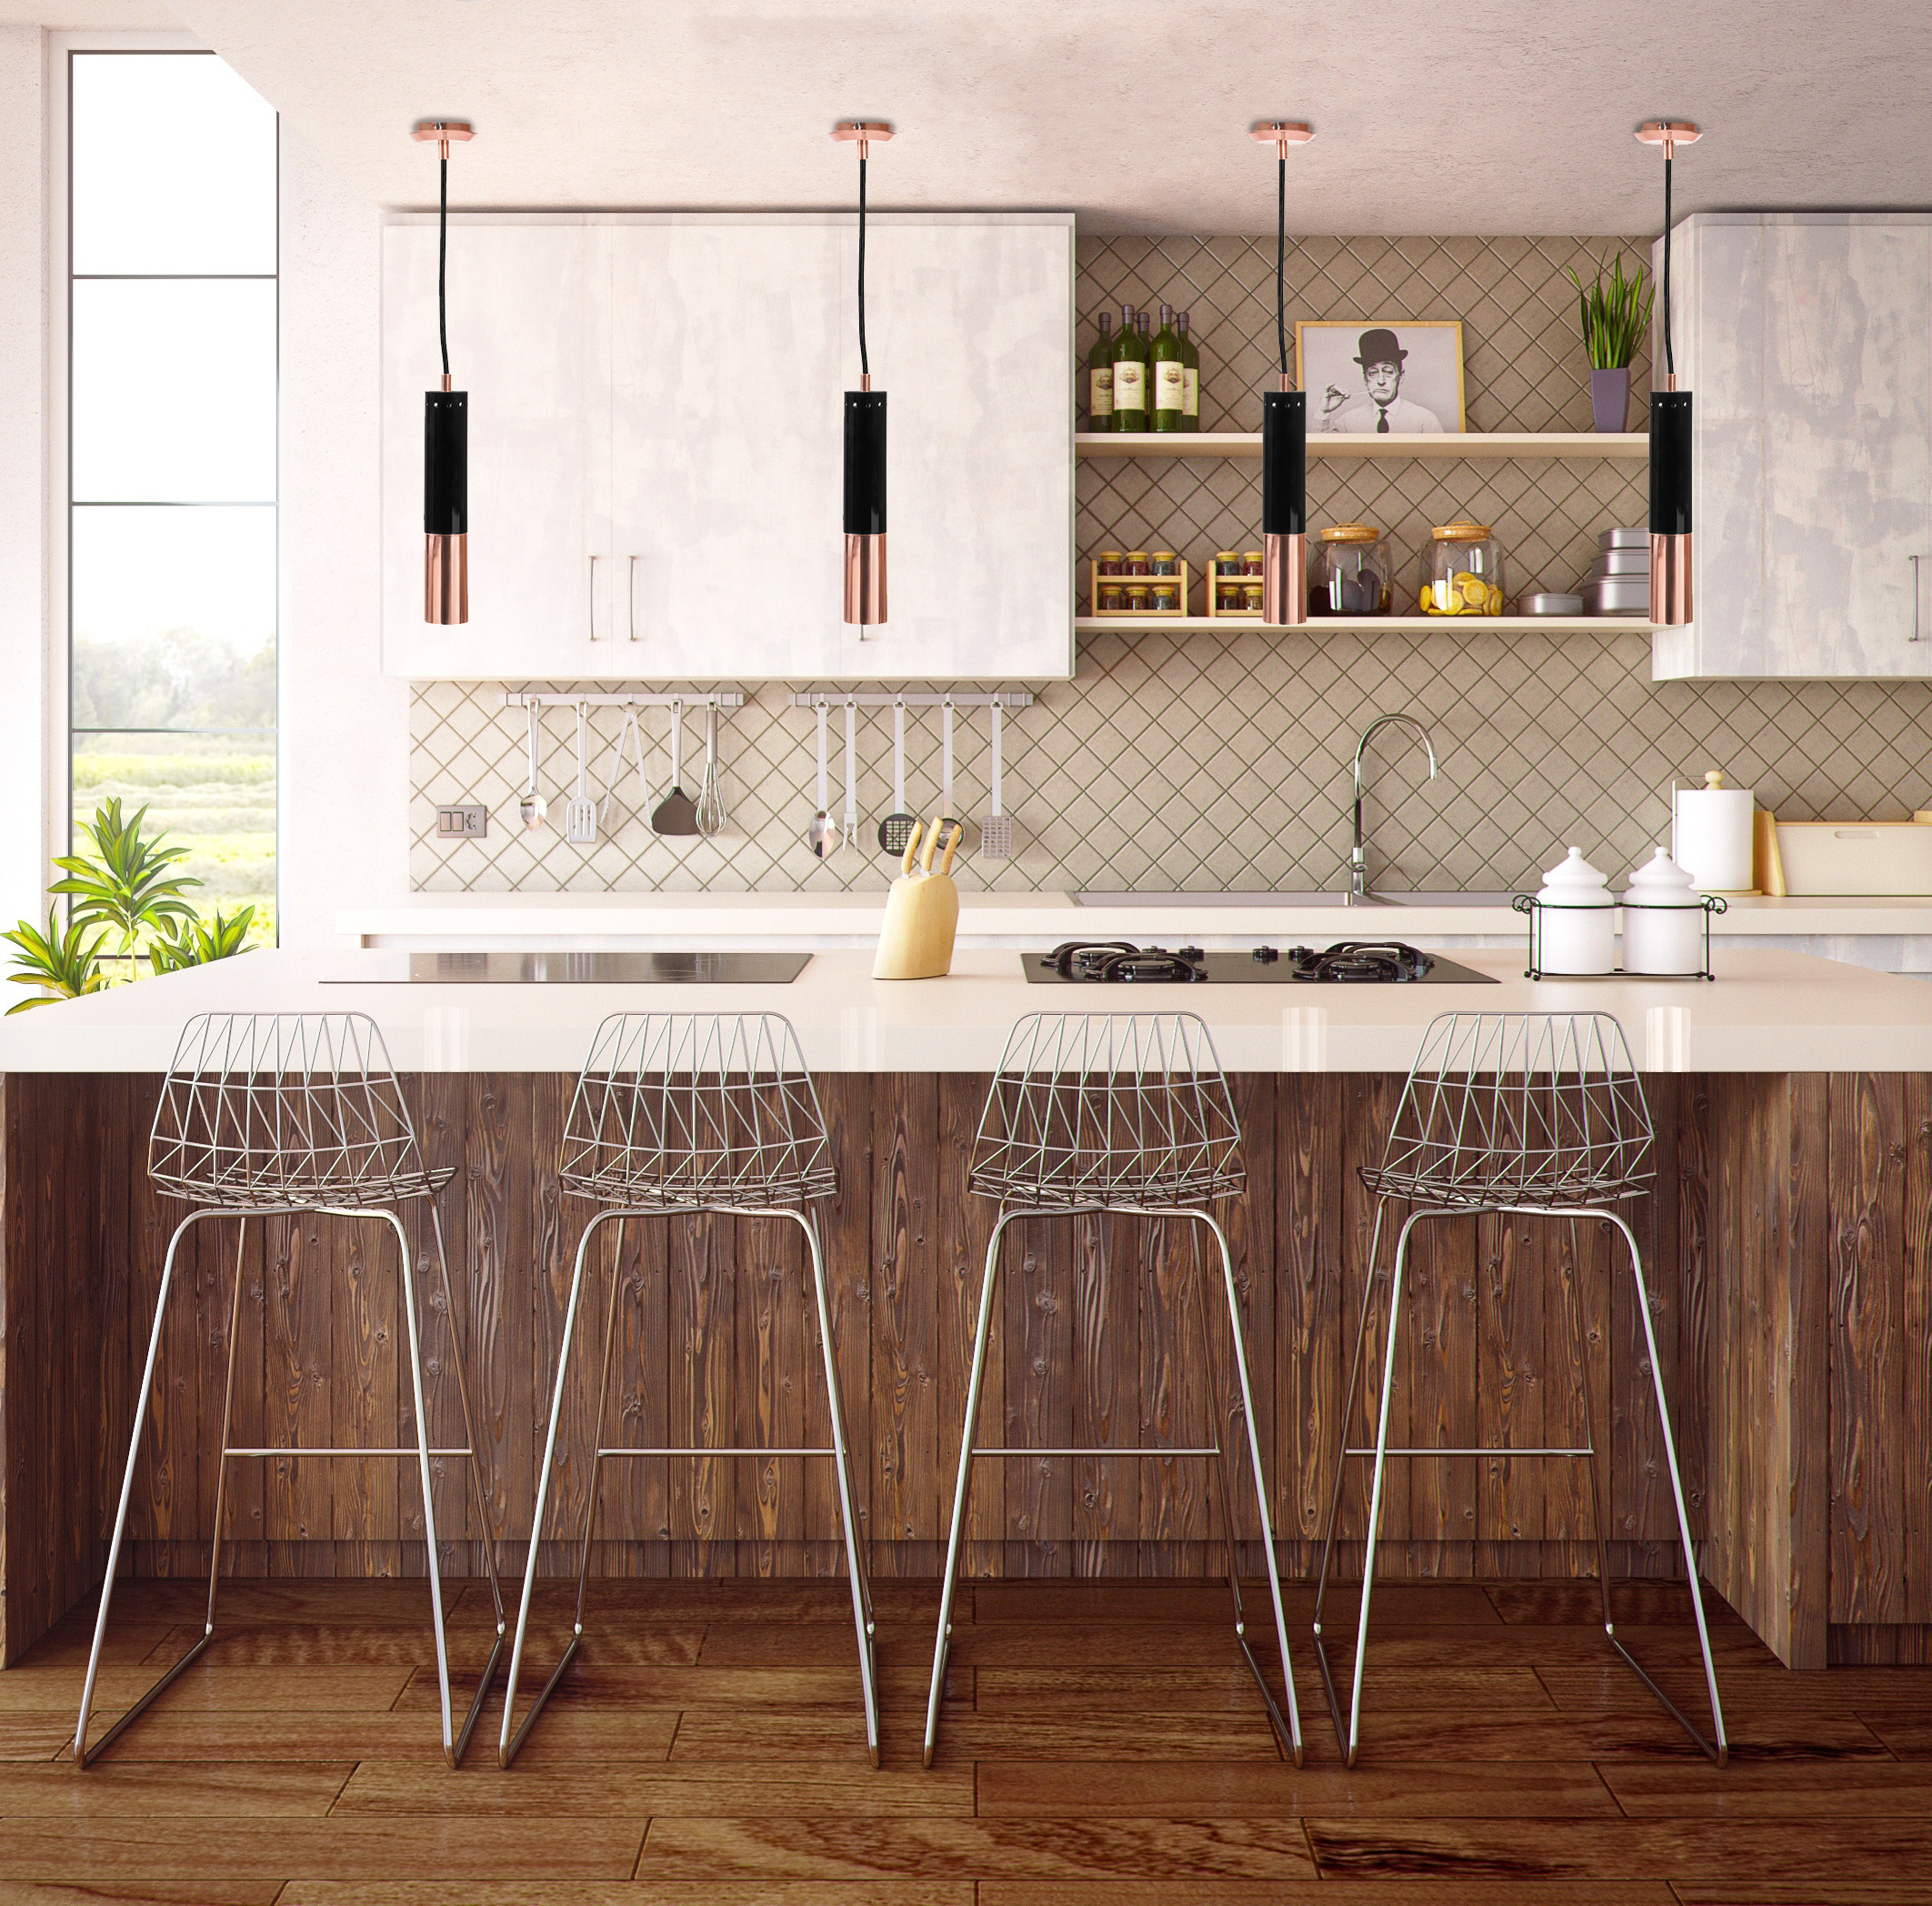 6 Lighting Ideas That Will Spice Your Kitchen Décor!